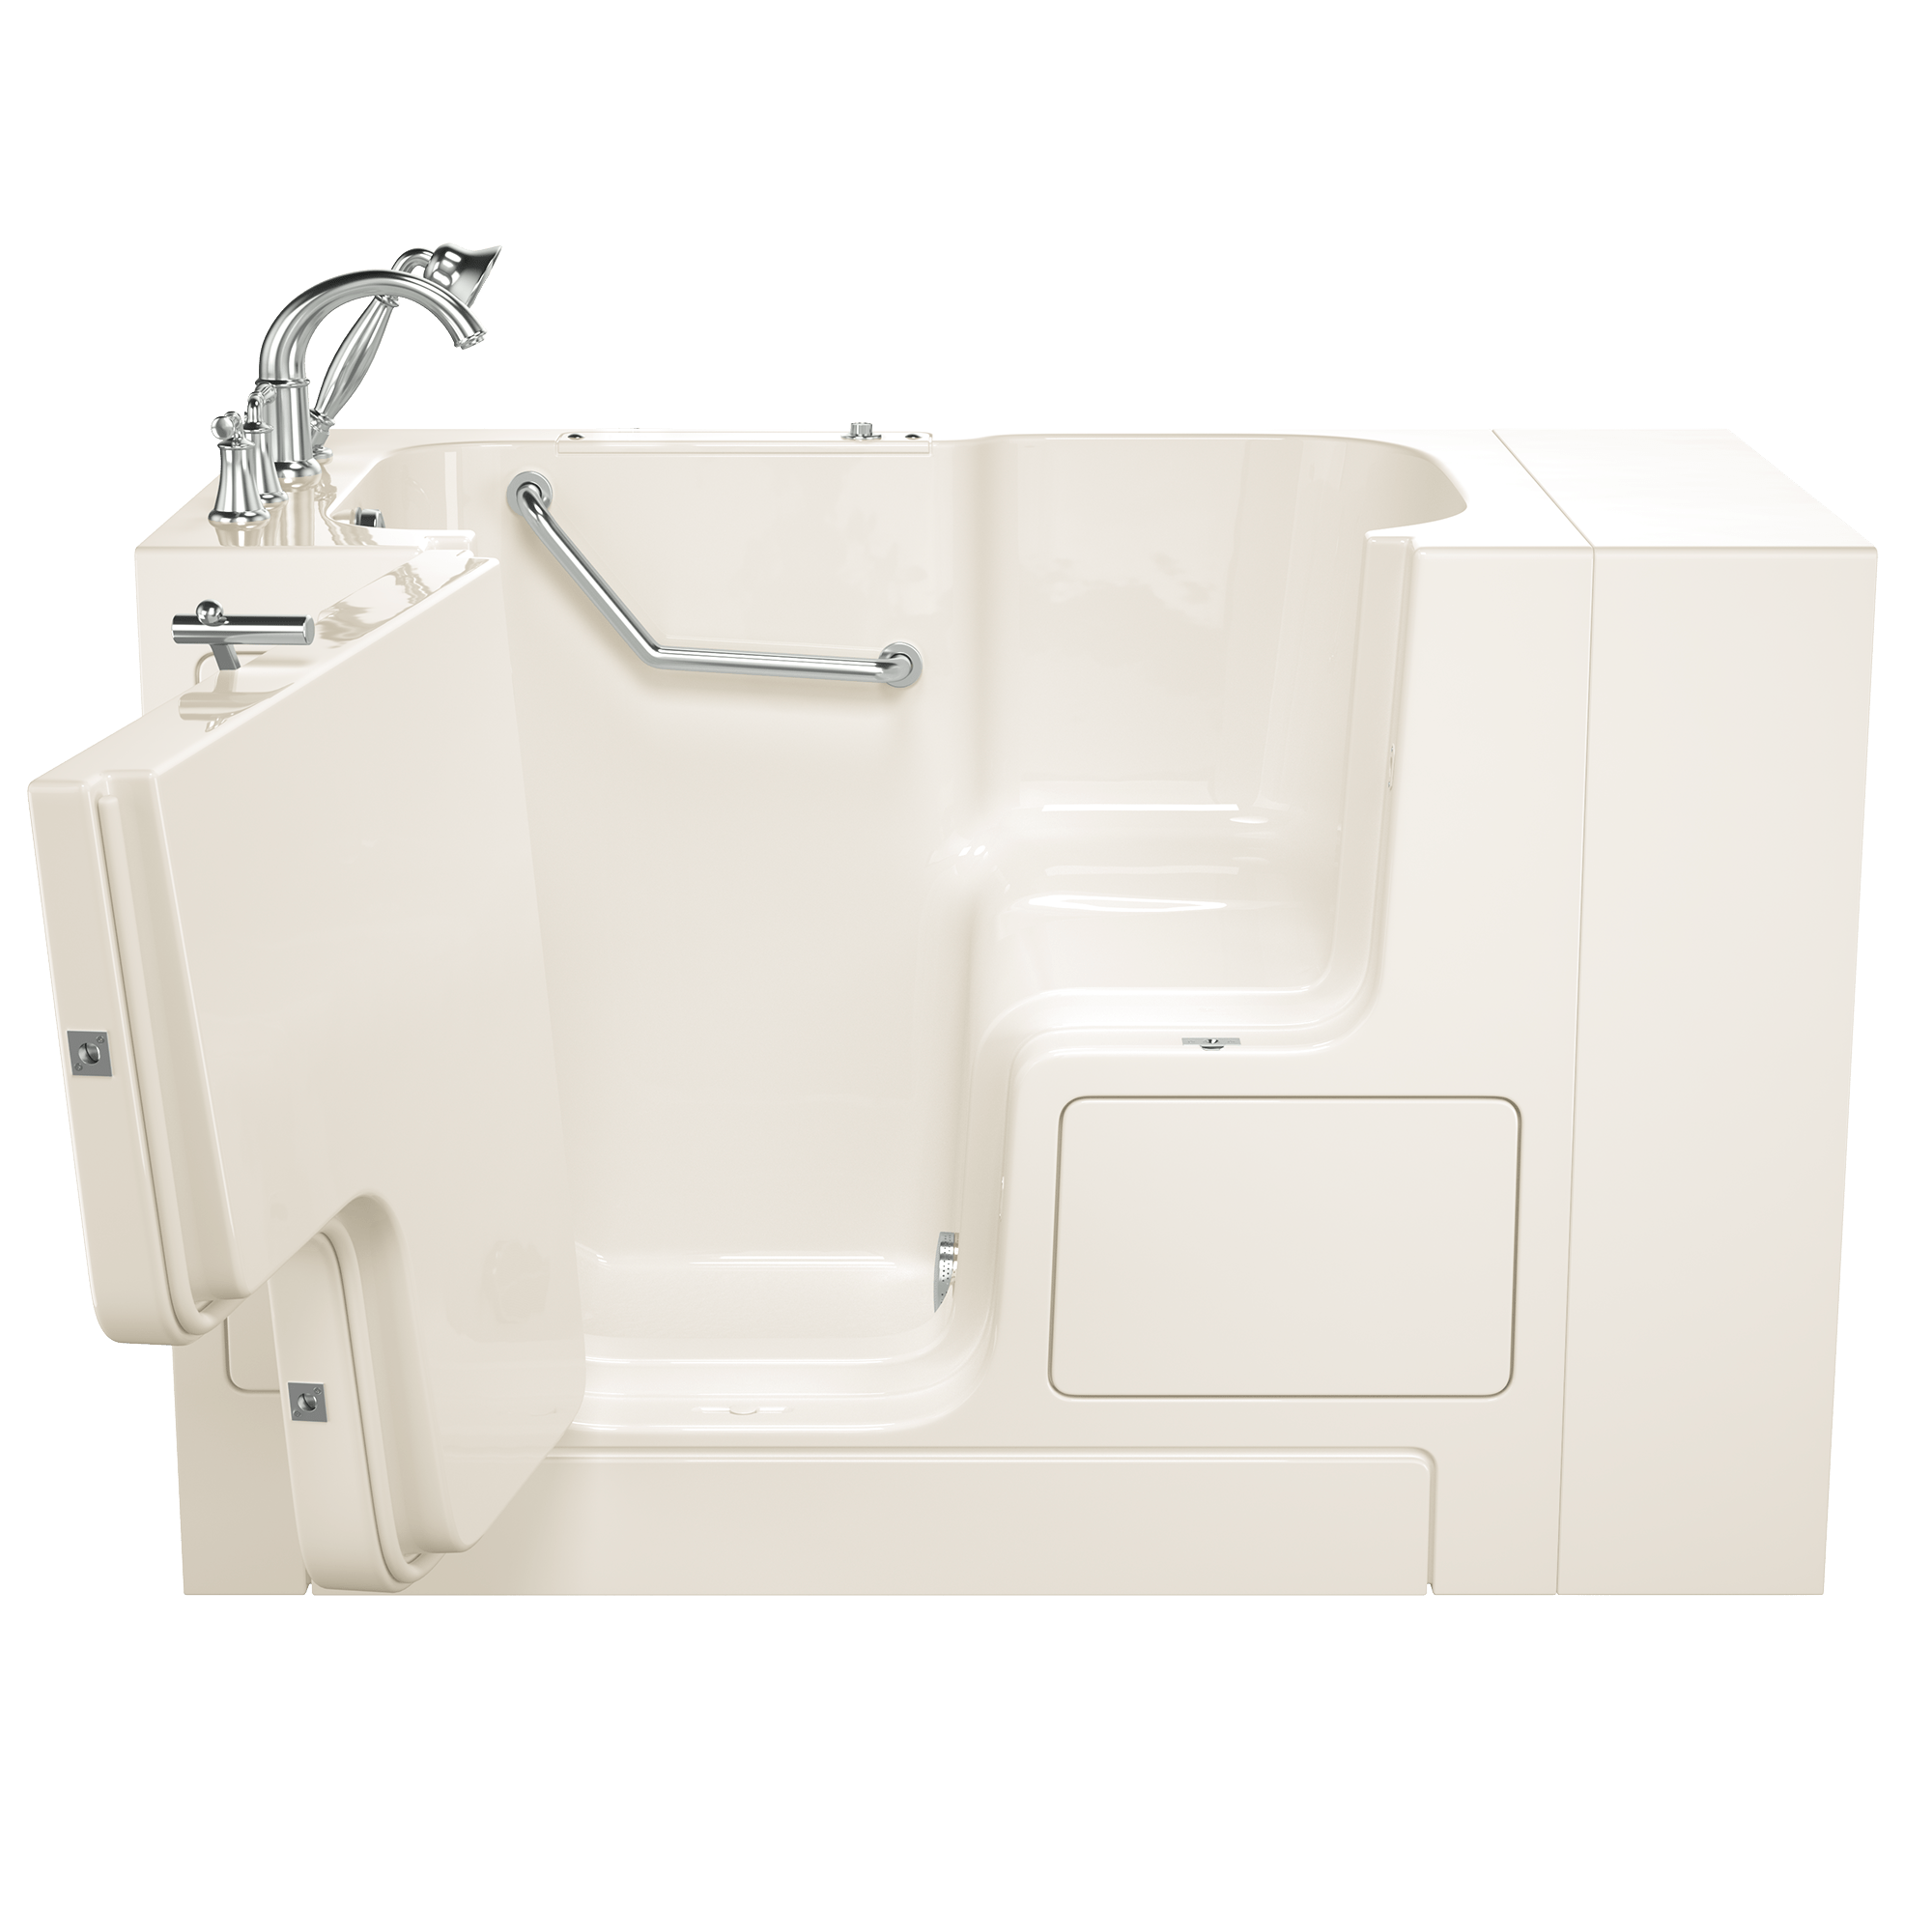 Gelcoat Value Series 32 x 52 -Inch Walk-in Tub With Soaker System - Left-Hand Drain With Faucet